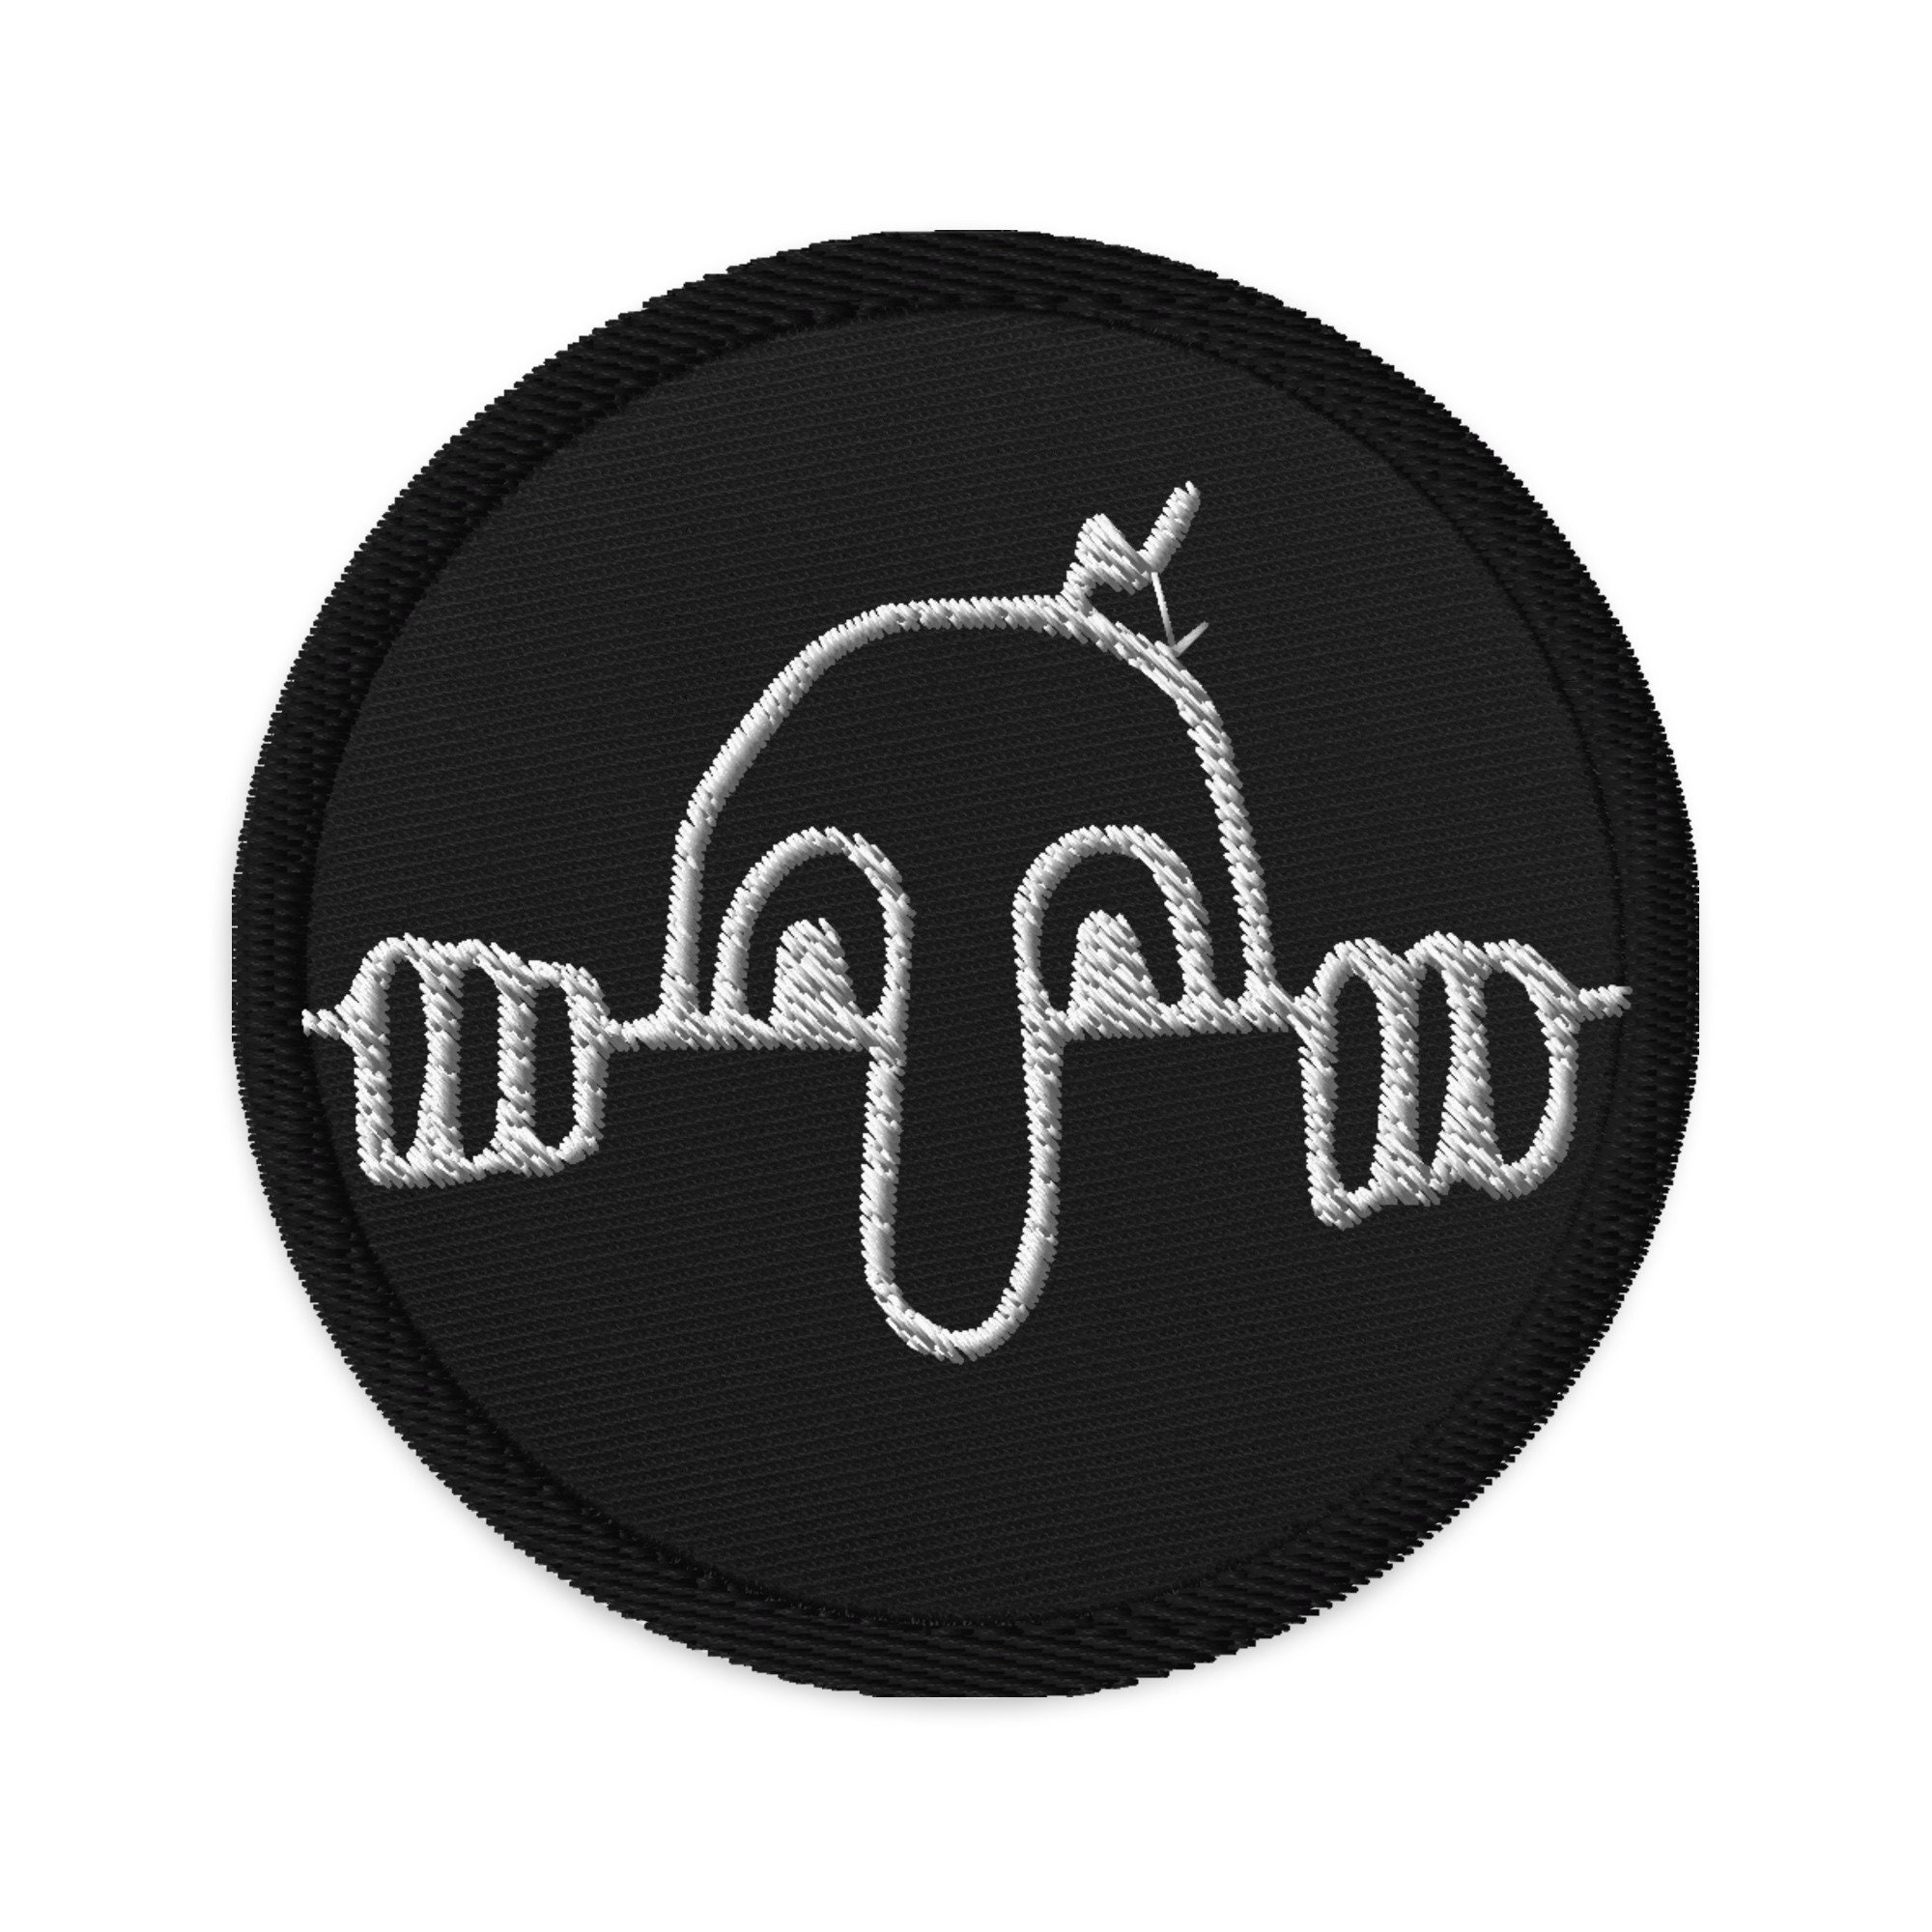 Kilroy was here Patch - Funny Tactical Military Morale Embroidered Patch  Hook Fastener Backing Multicam OCP